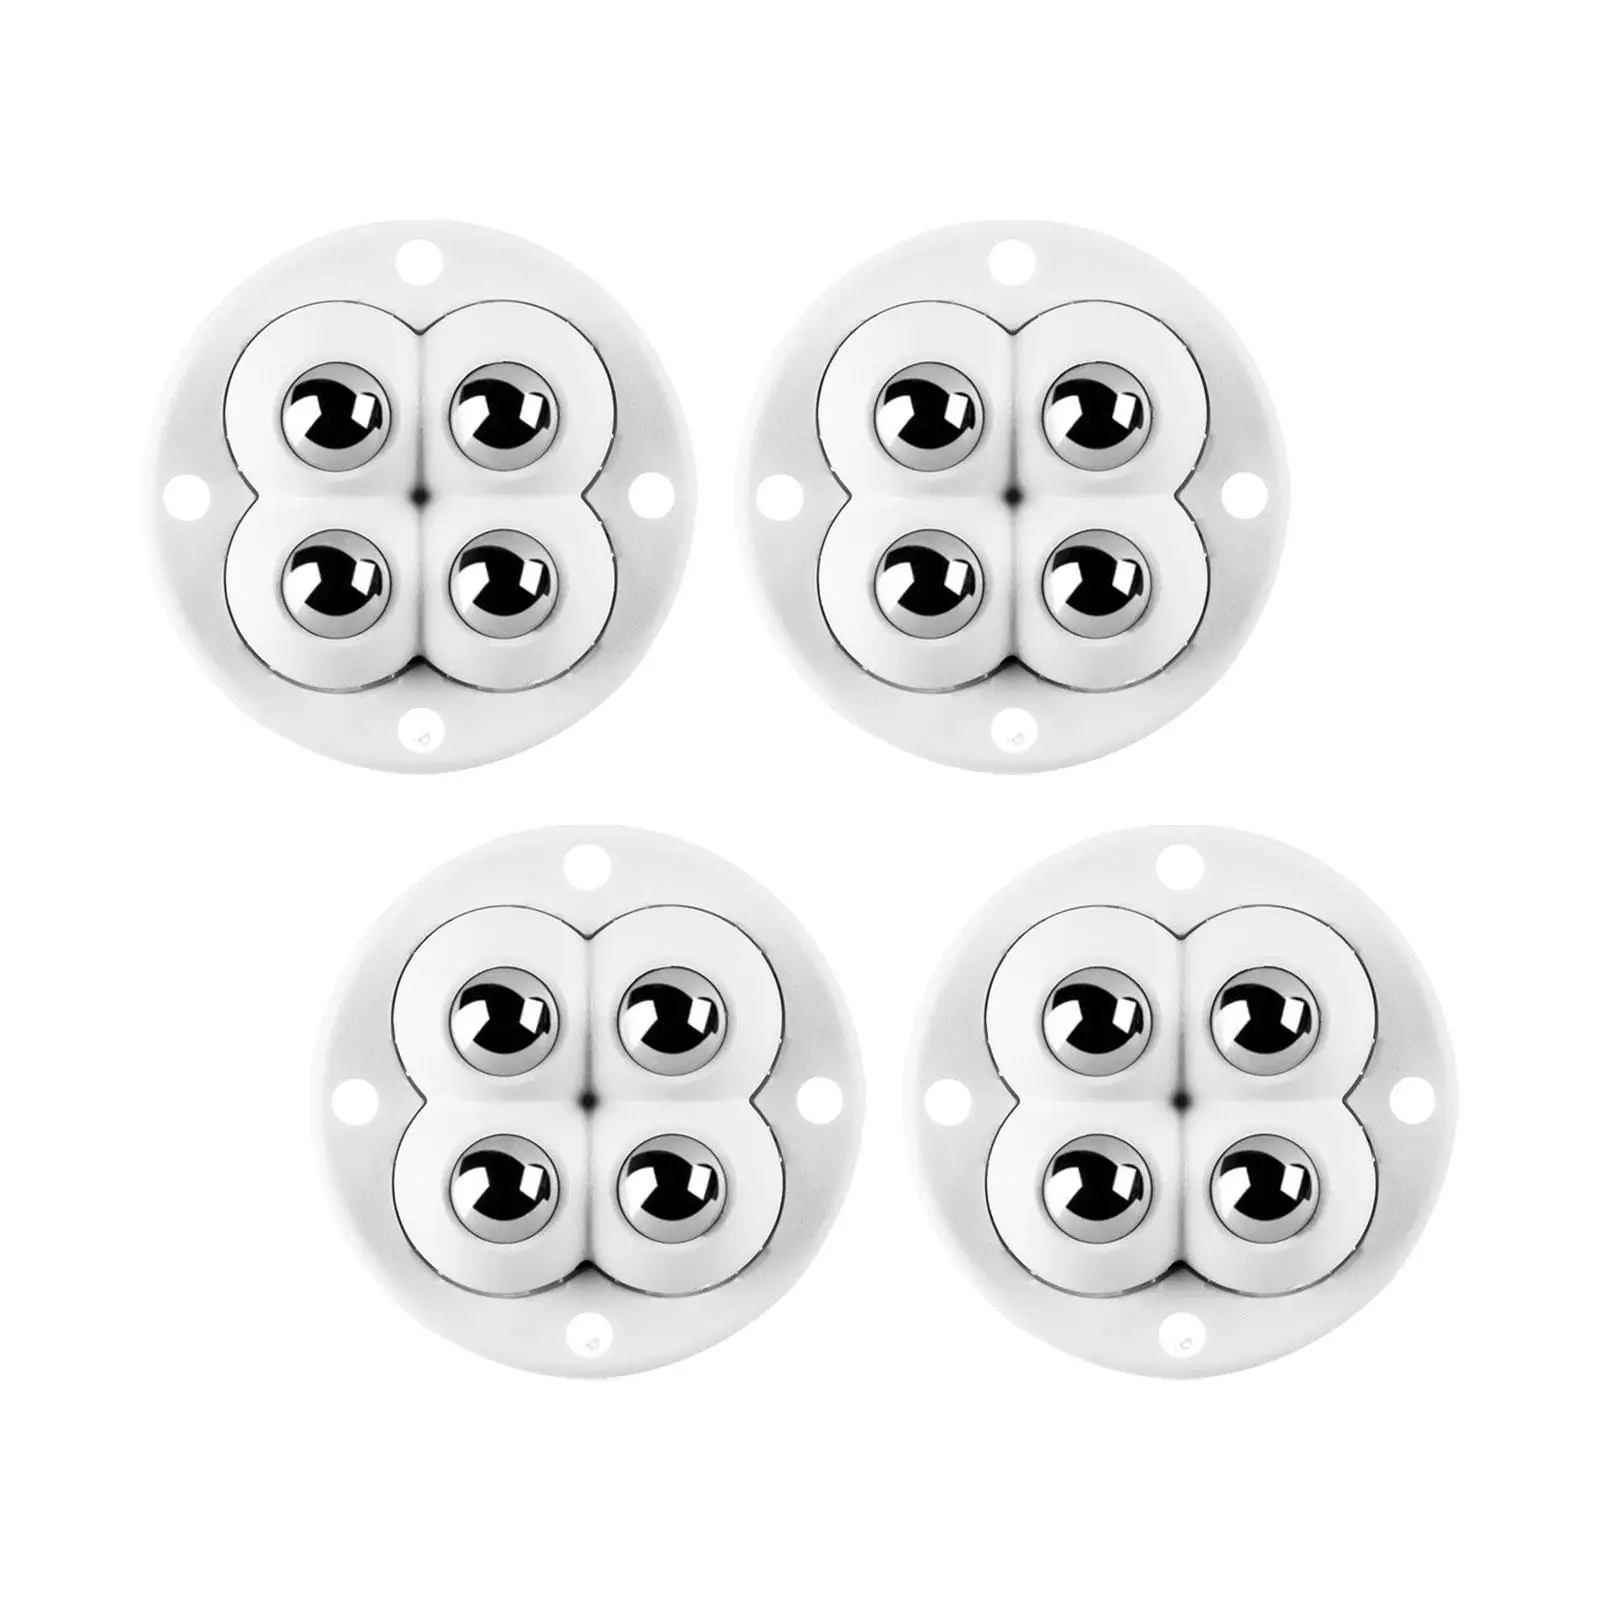 4x Paste Type Caster Wheels Swivel Caster Pulley Swivel Wheels for Trash Can